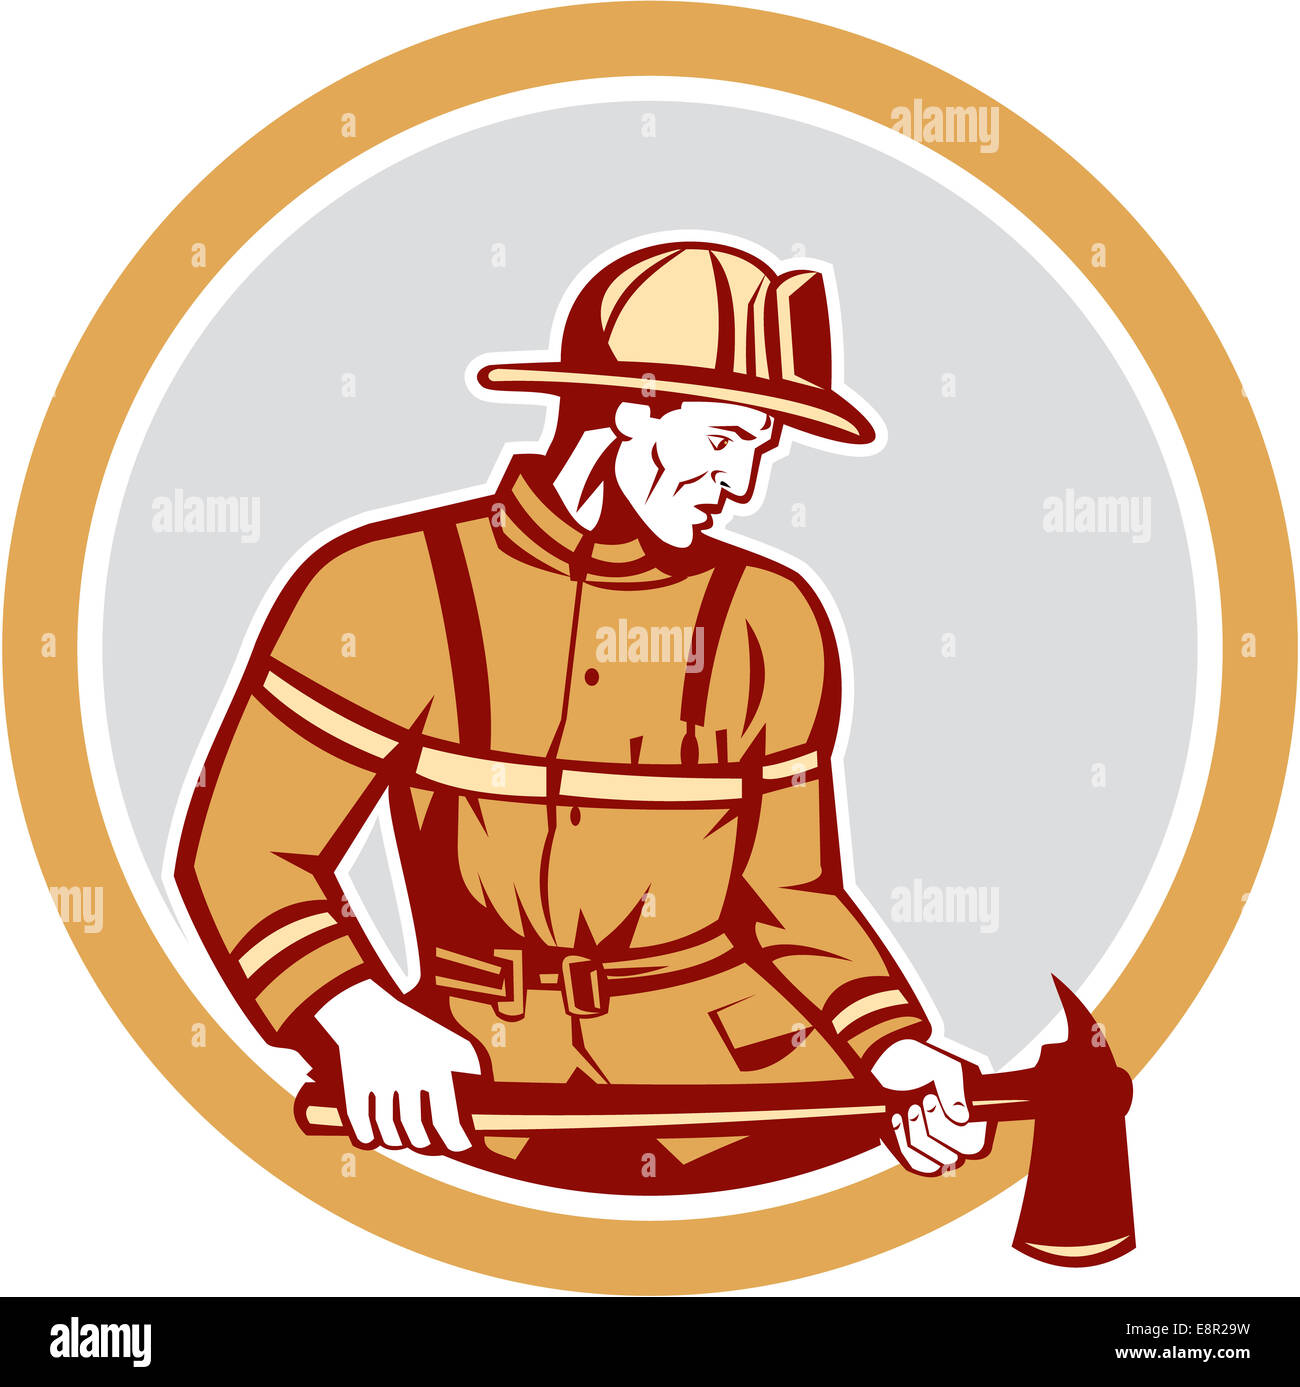 Illustration of a fireman fire fighter emergency worker holding a fire axe looking to the side set inside circle on isolated background done in retro style. Stock Photo